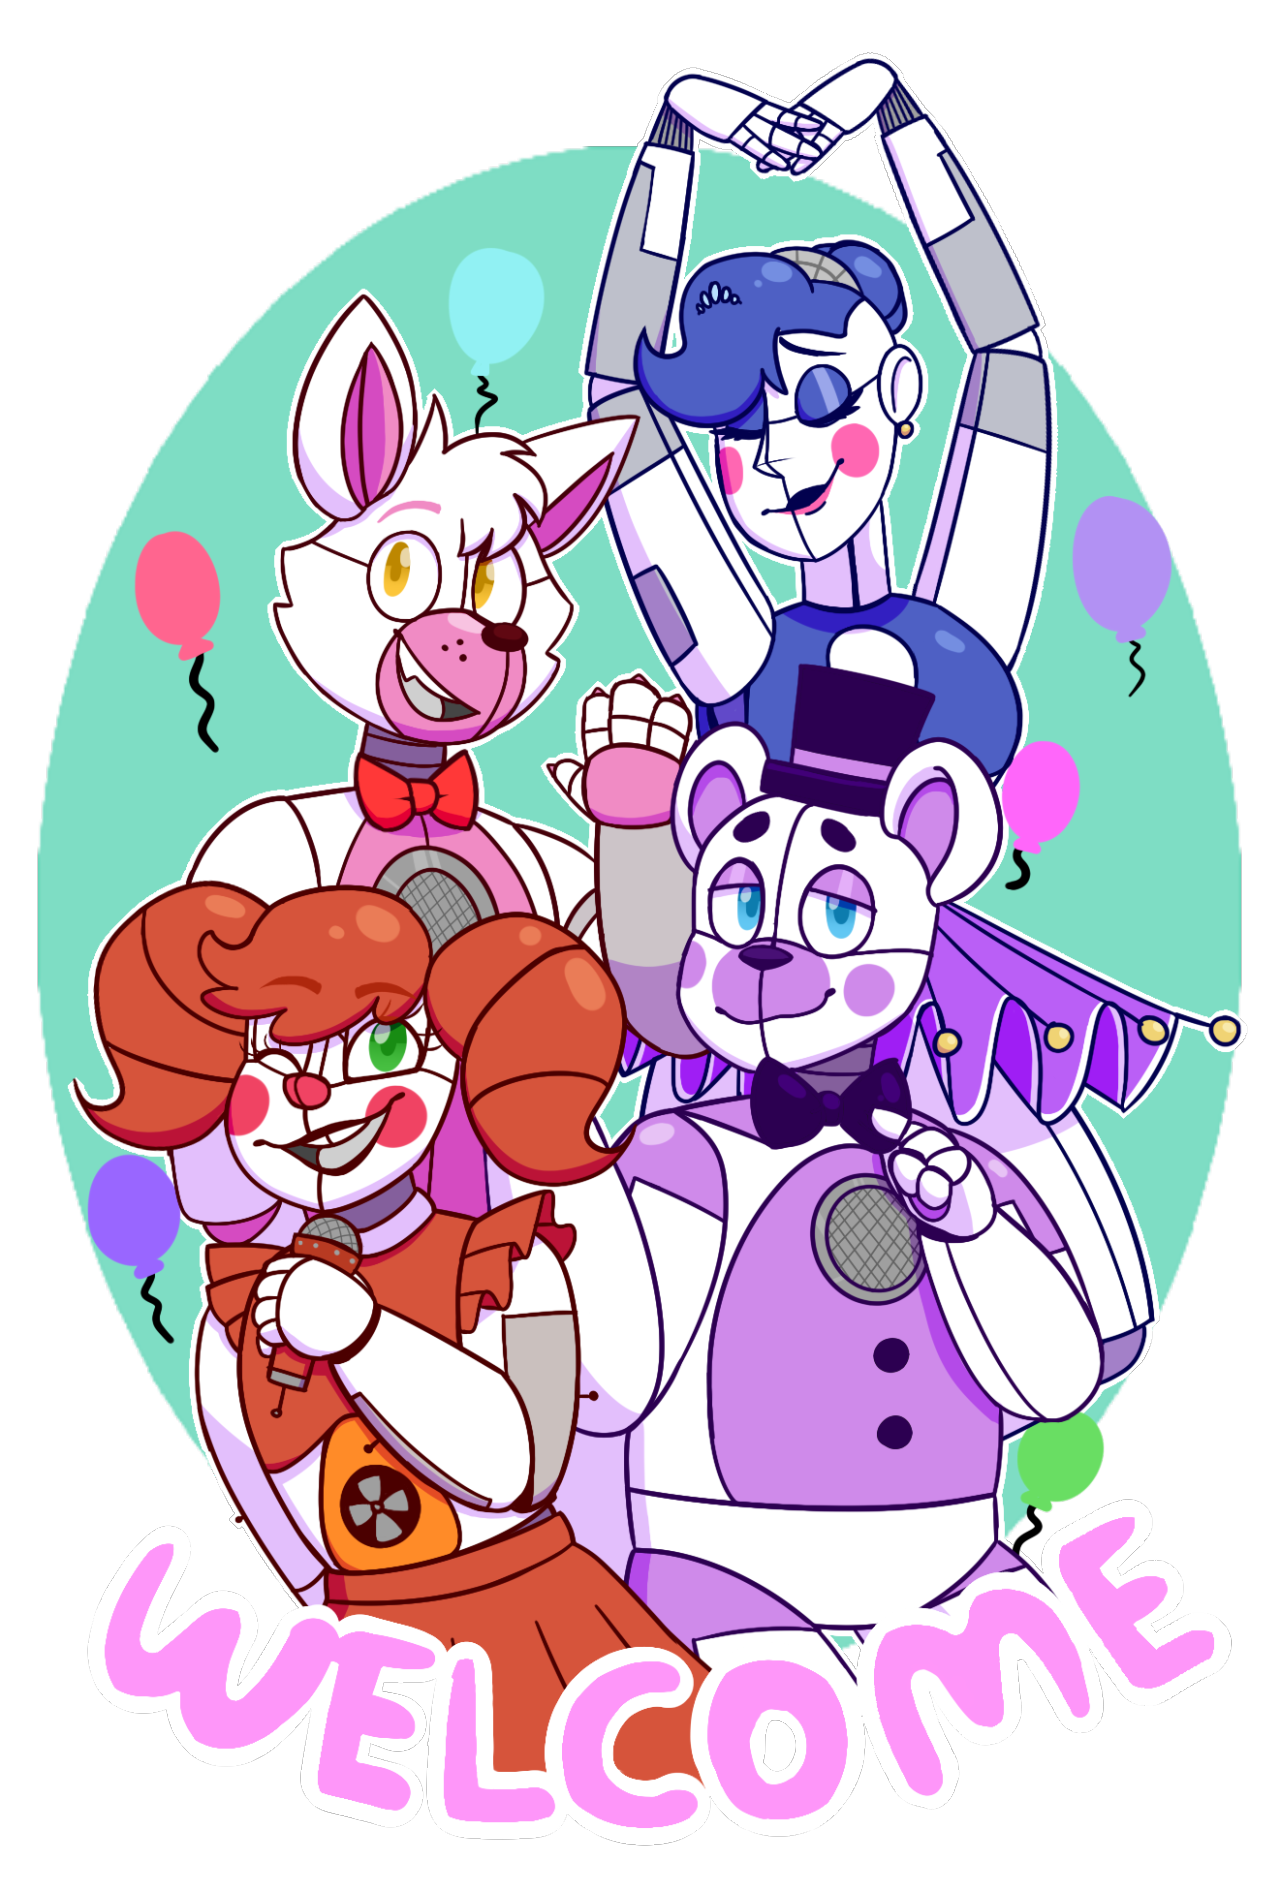 circus baby's pizza world poster. fivenightsatfreddys on circus baby pizza world wallpapers